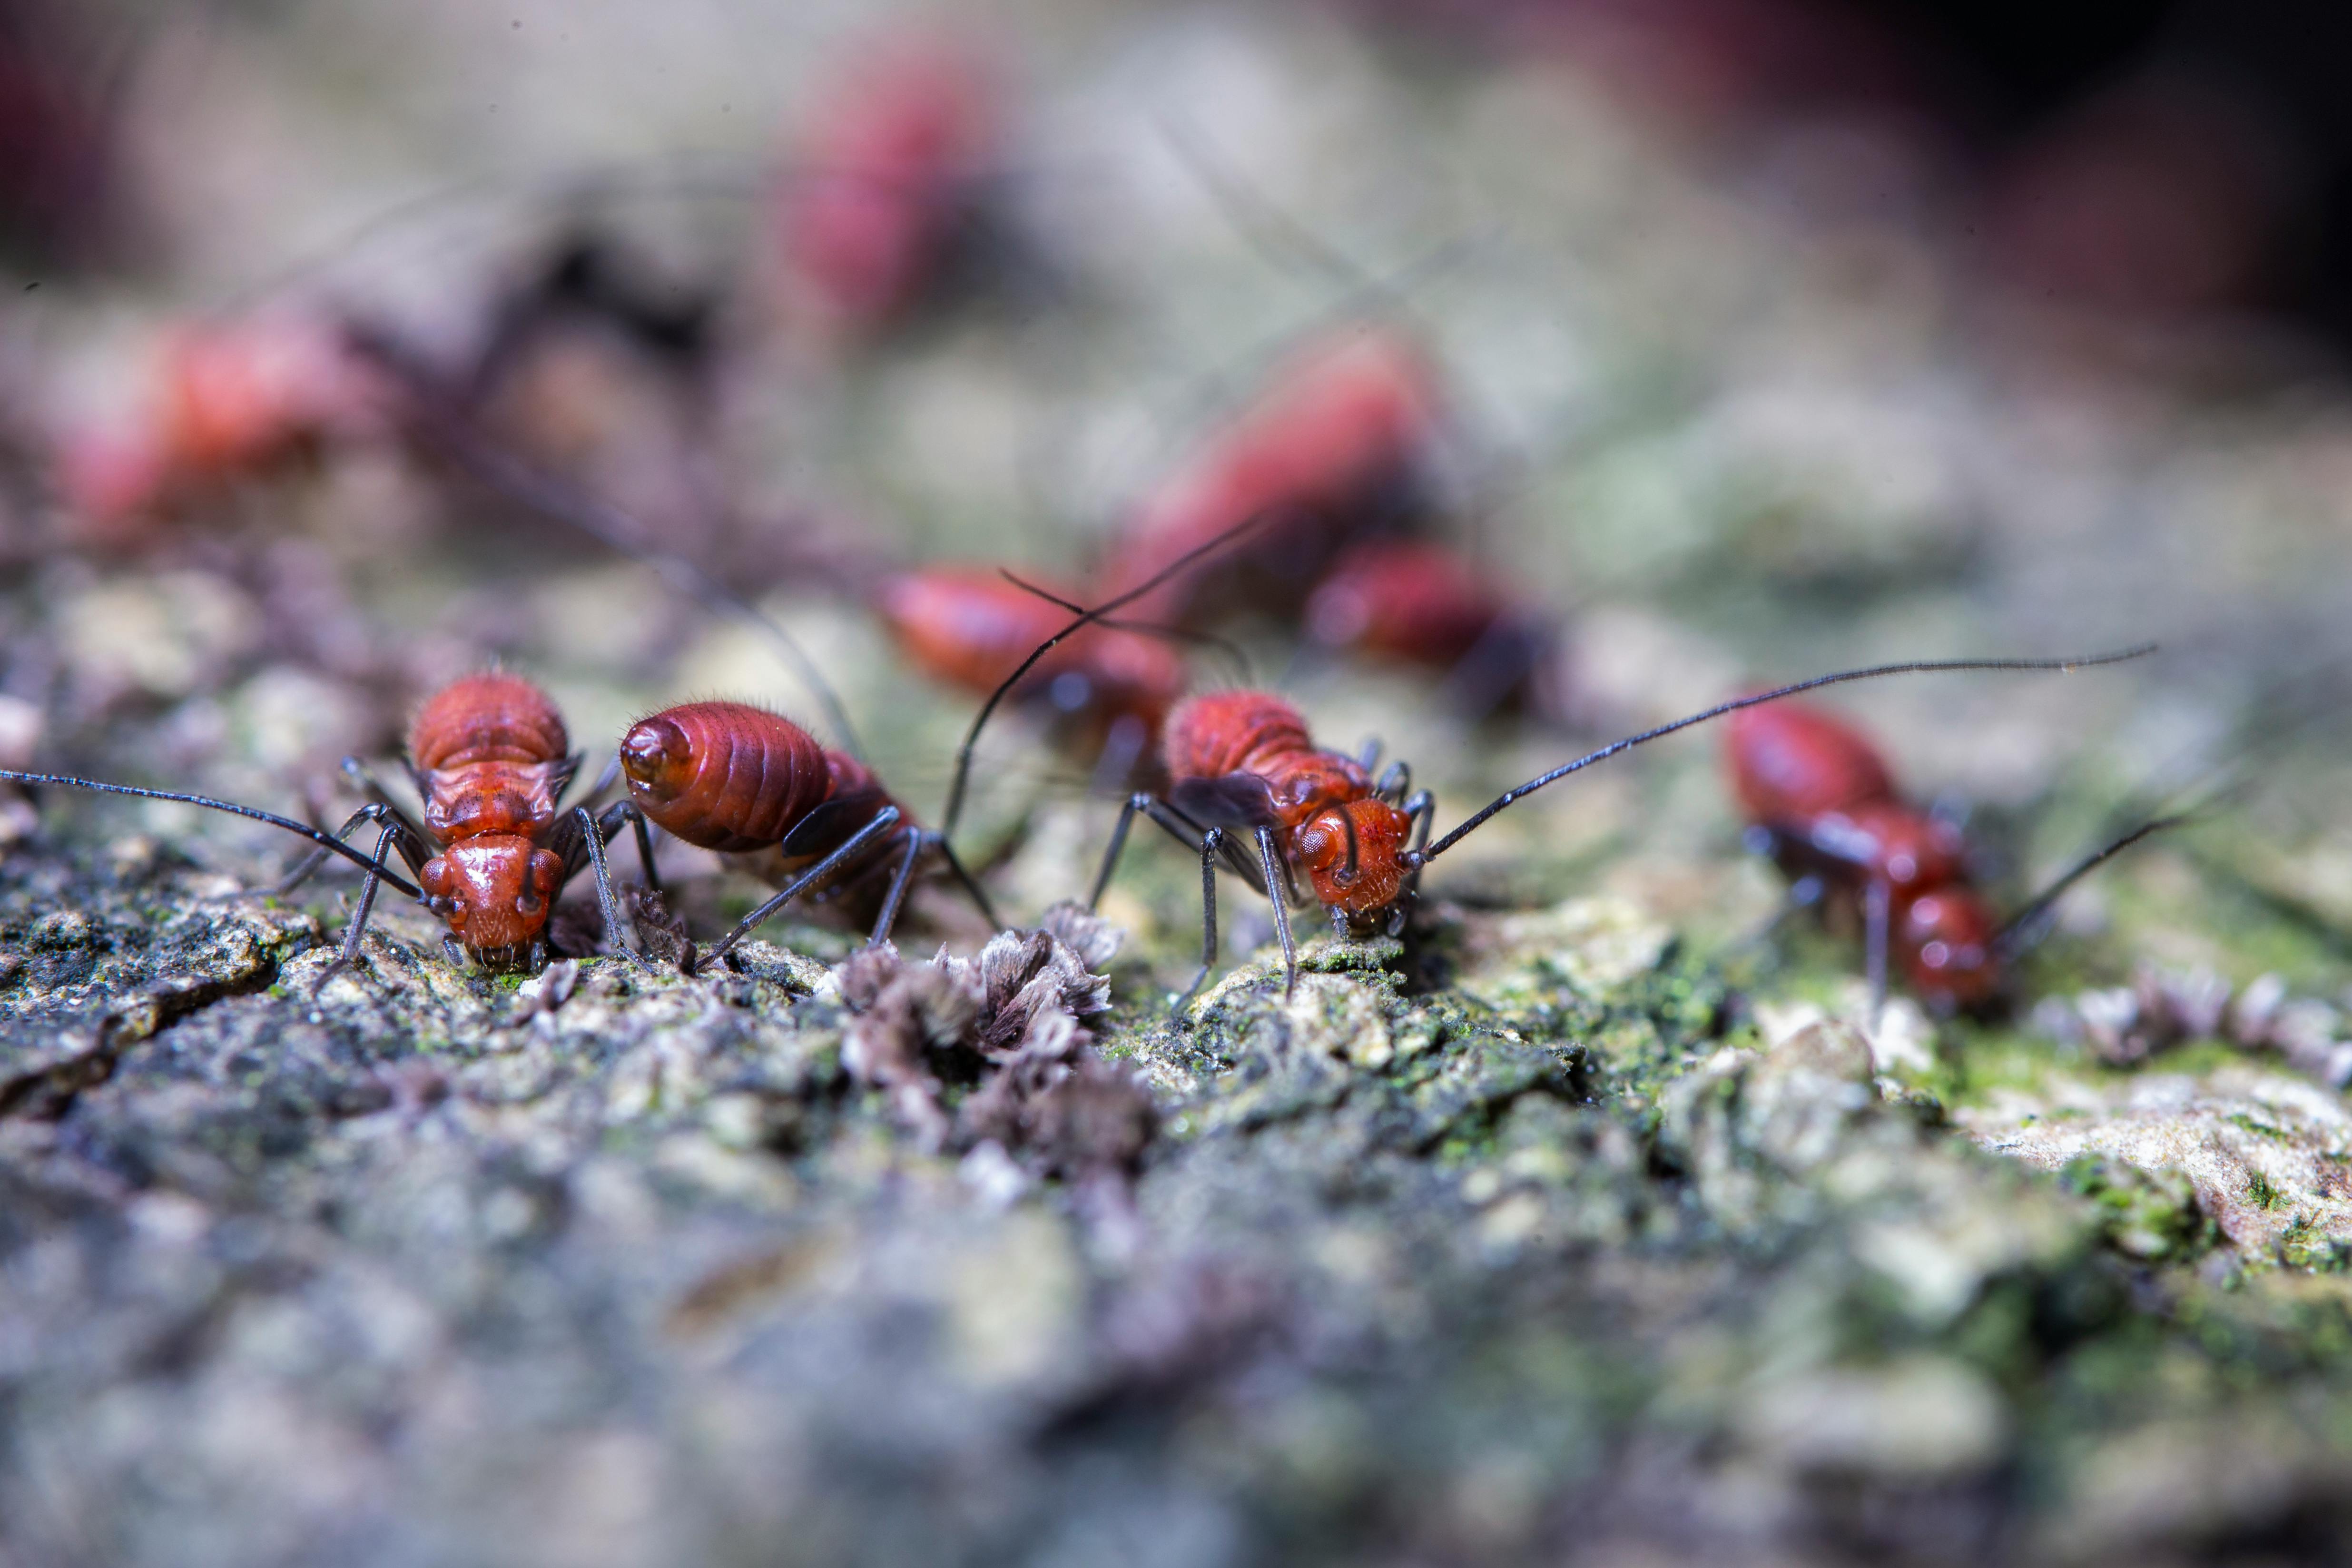 Ant Control Experts in Pflugerville, TX